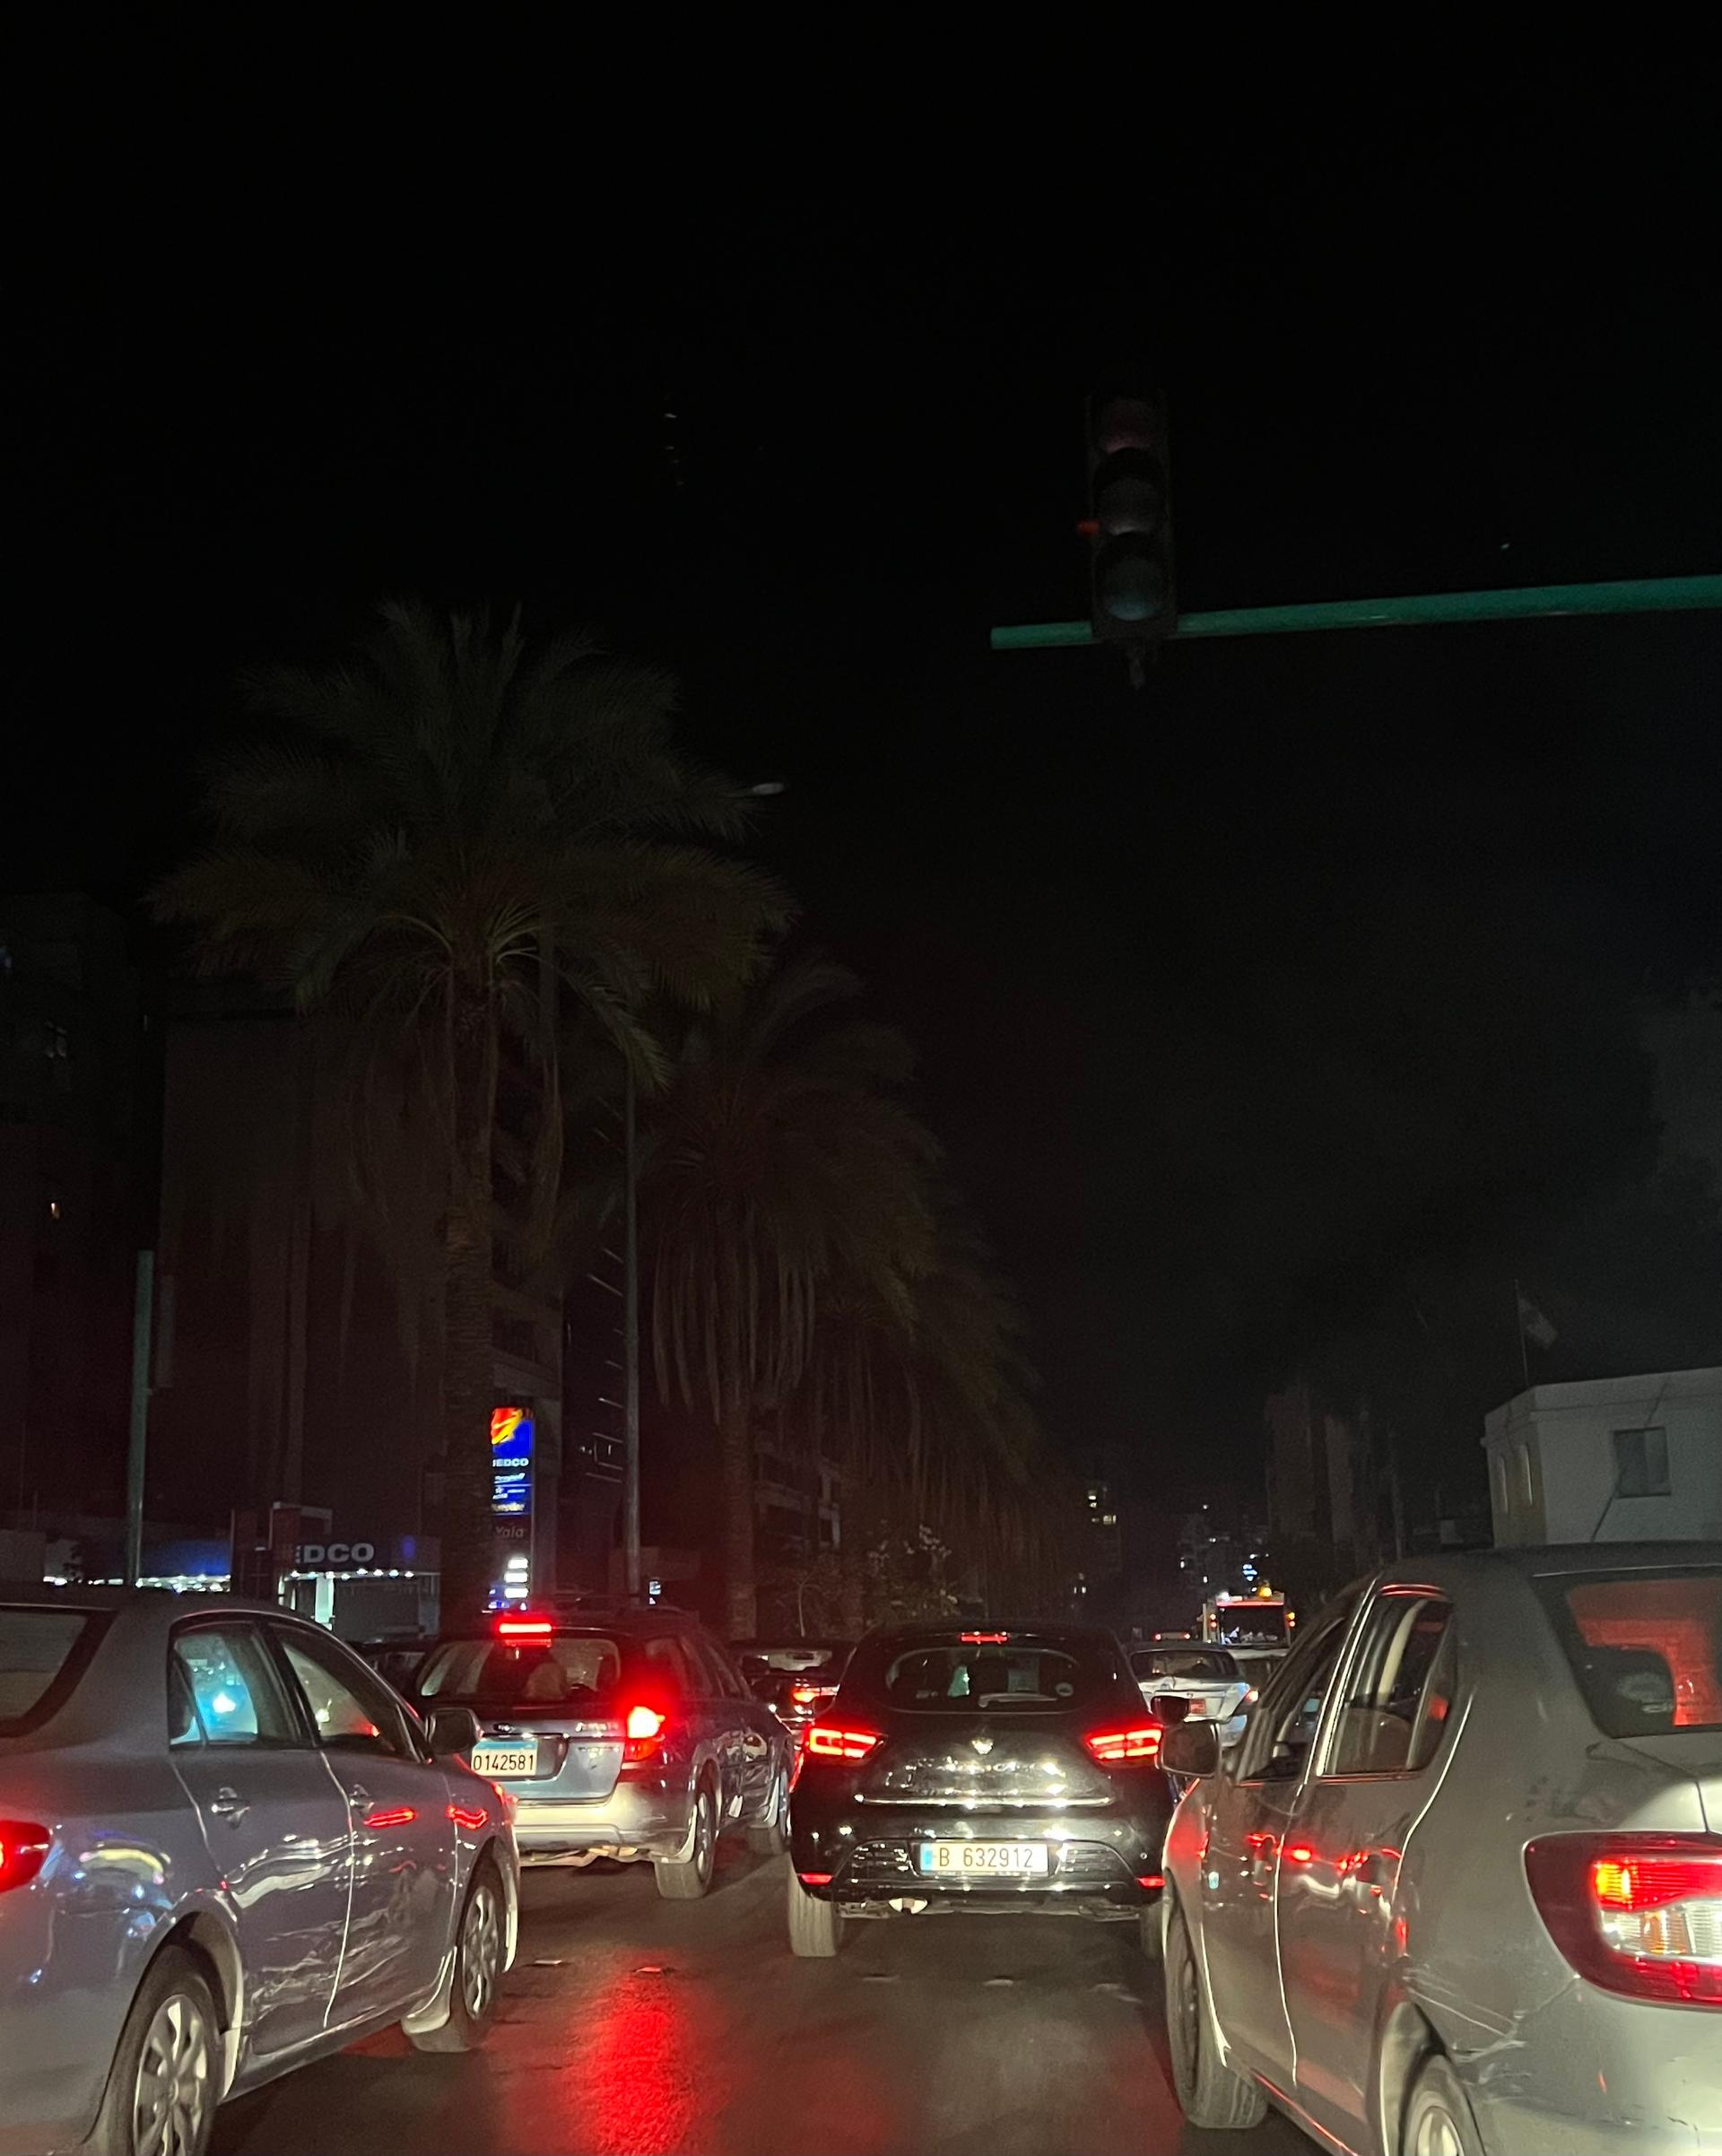 Lebanon’s capital, Beirut, plunges in darkness at night. Most street lamps and traffic lights don’t operate because of the electricity crisis.